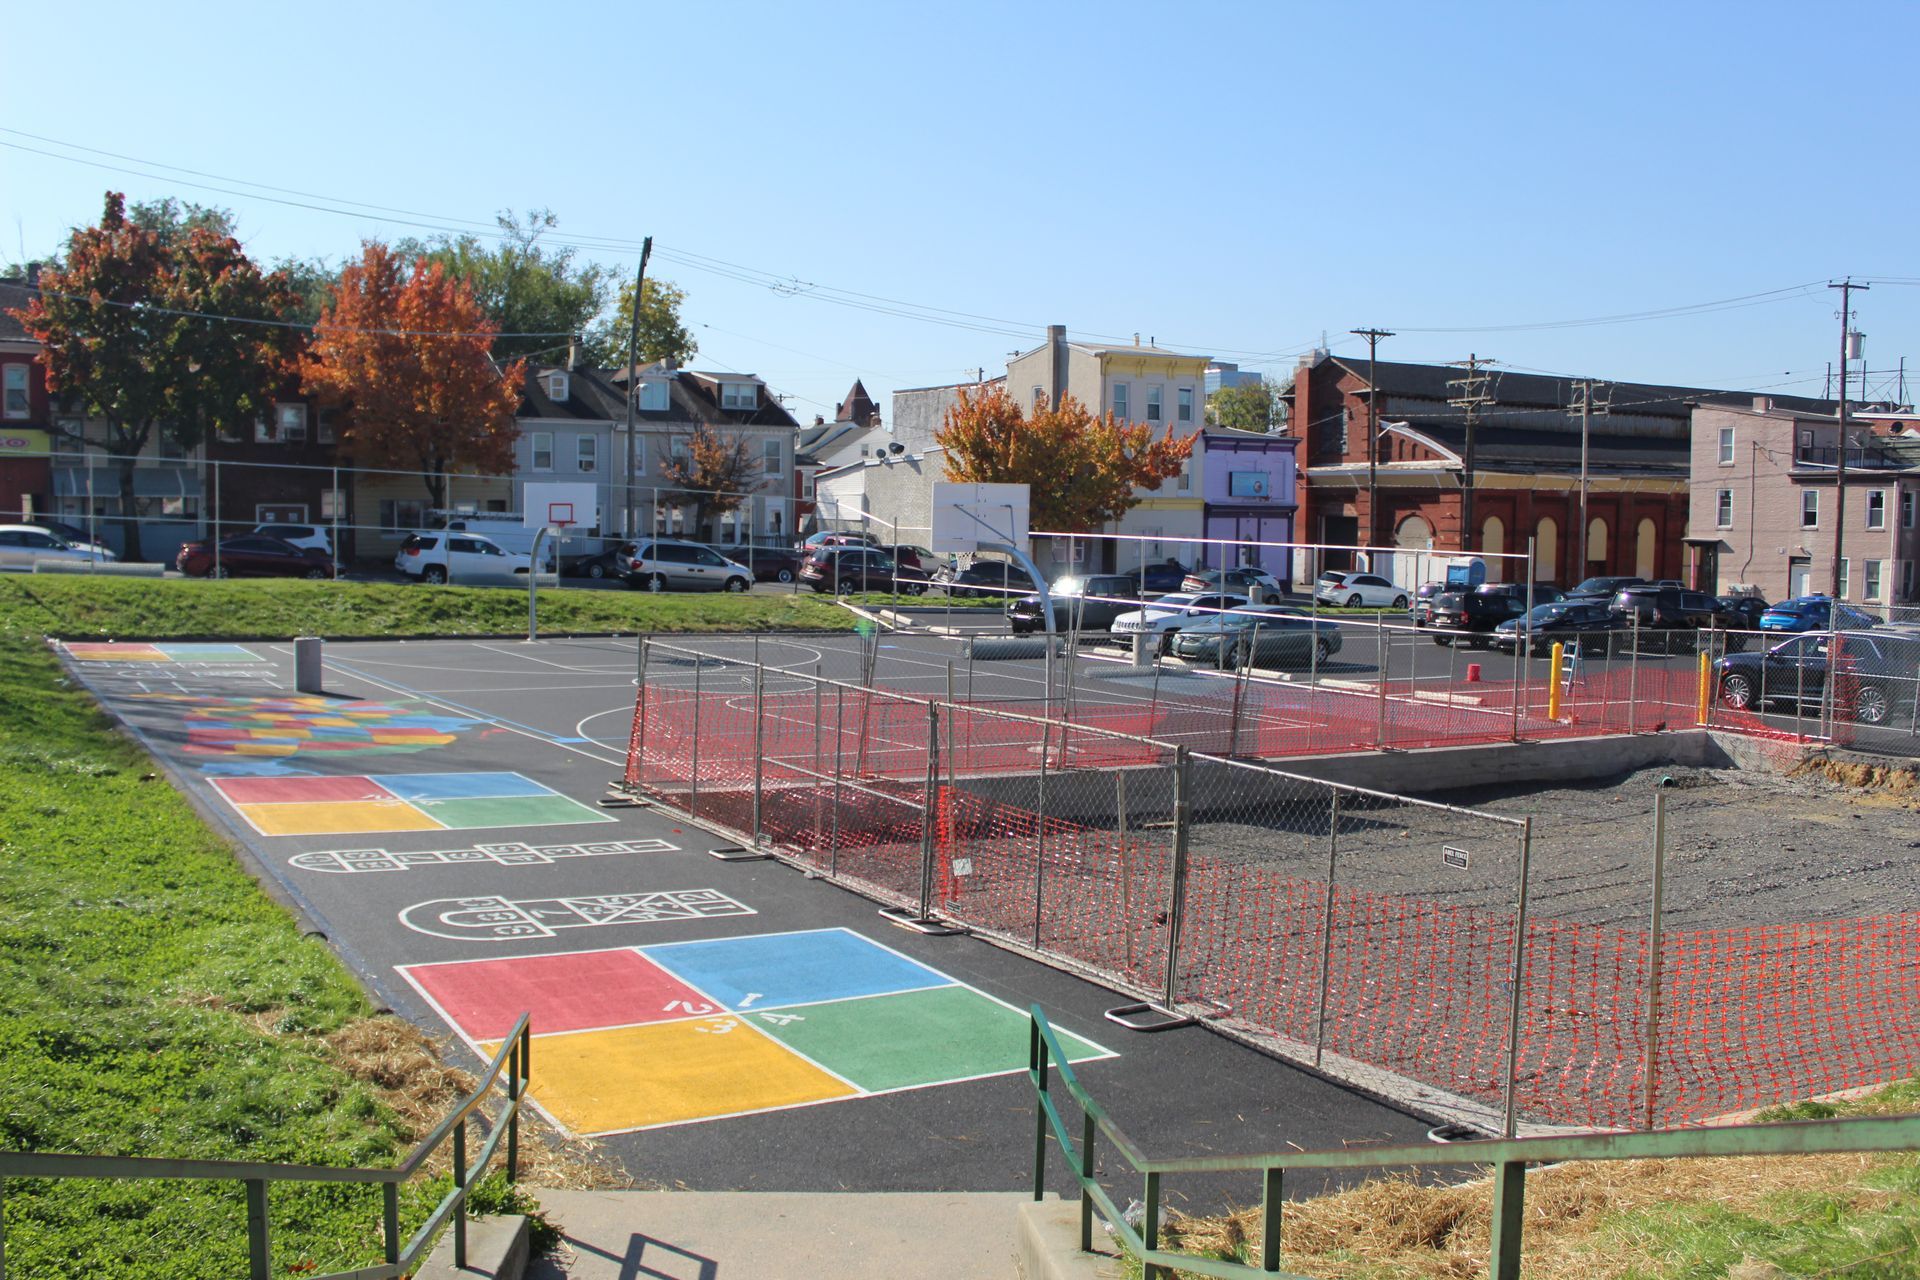 A parking lot with a colorful hopscotch in the middle of it